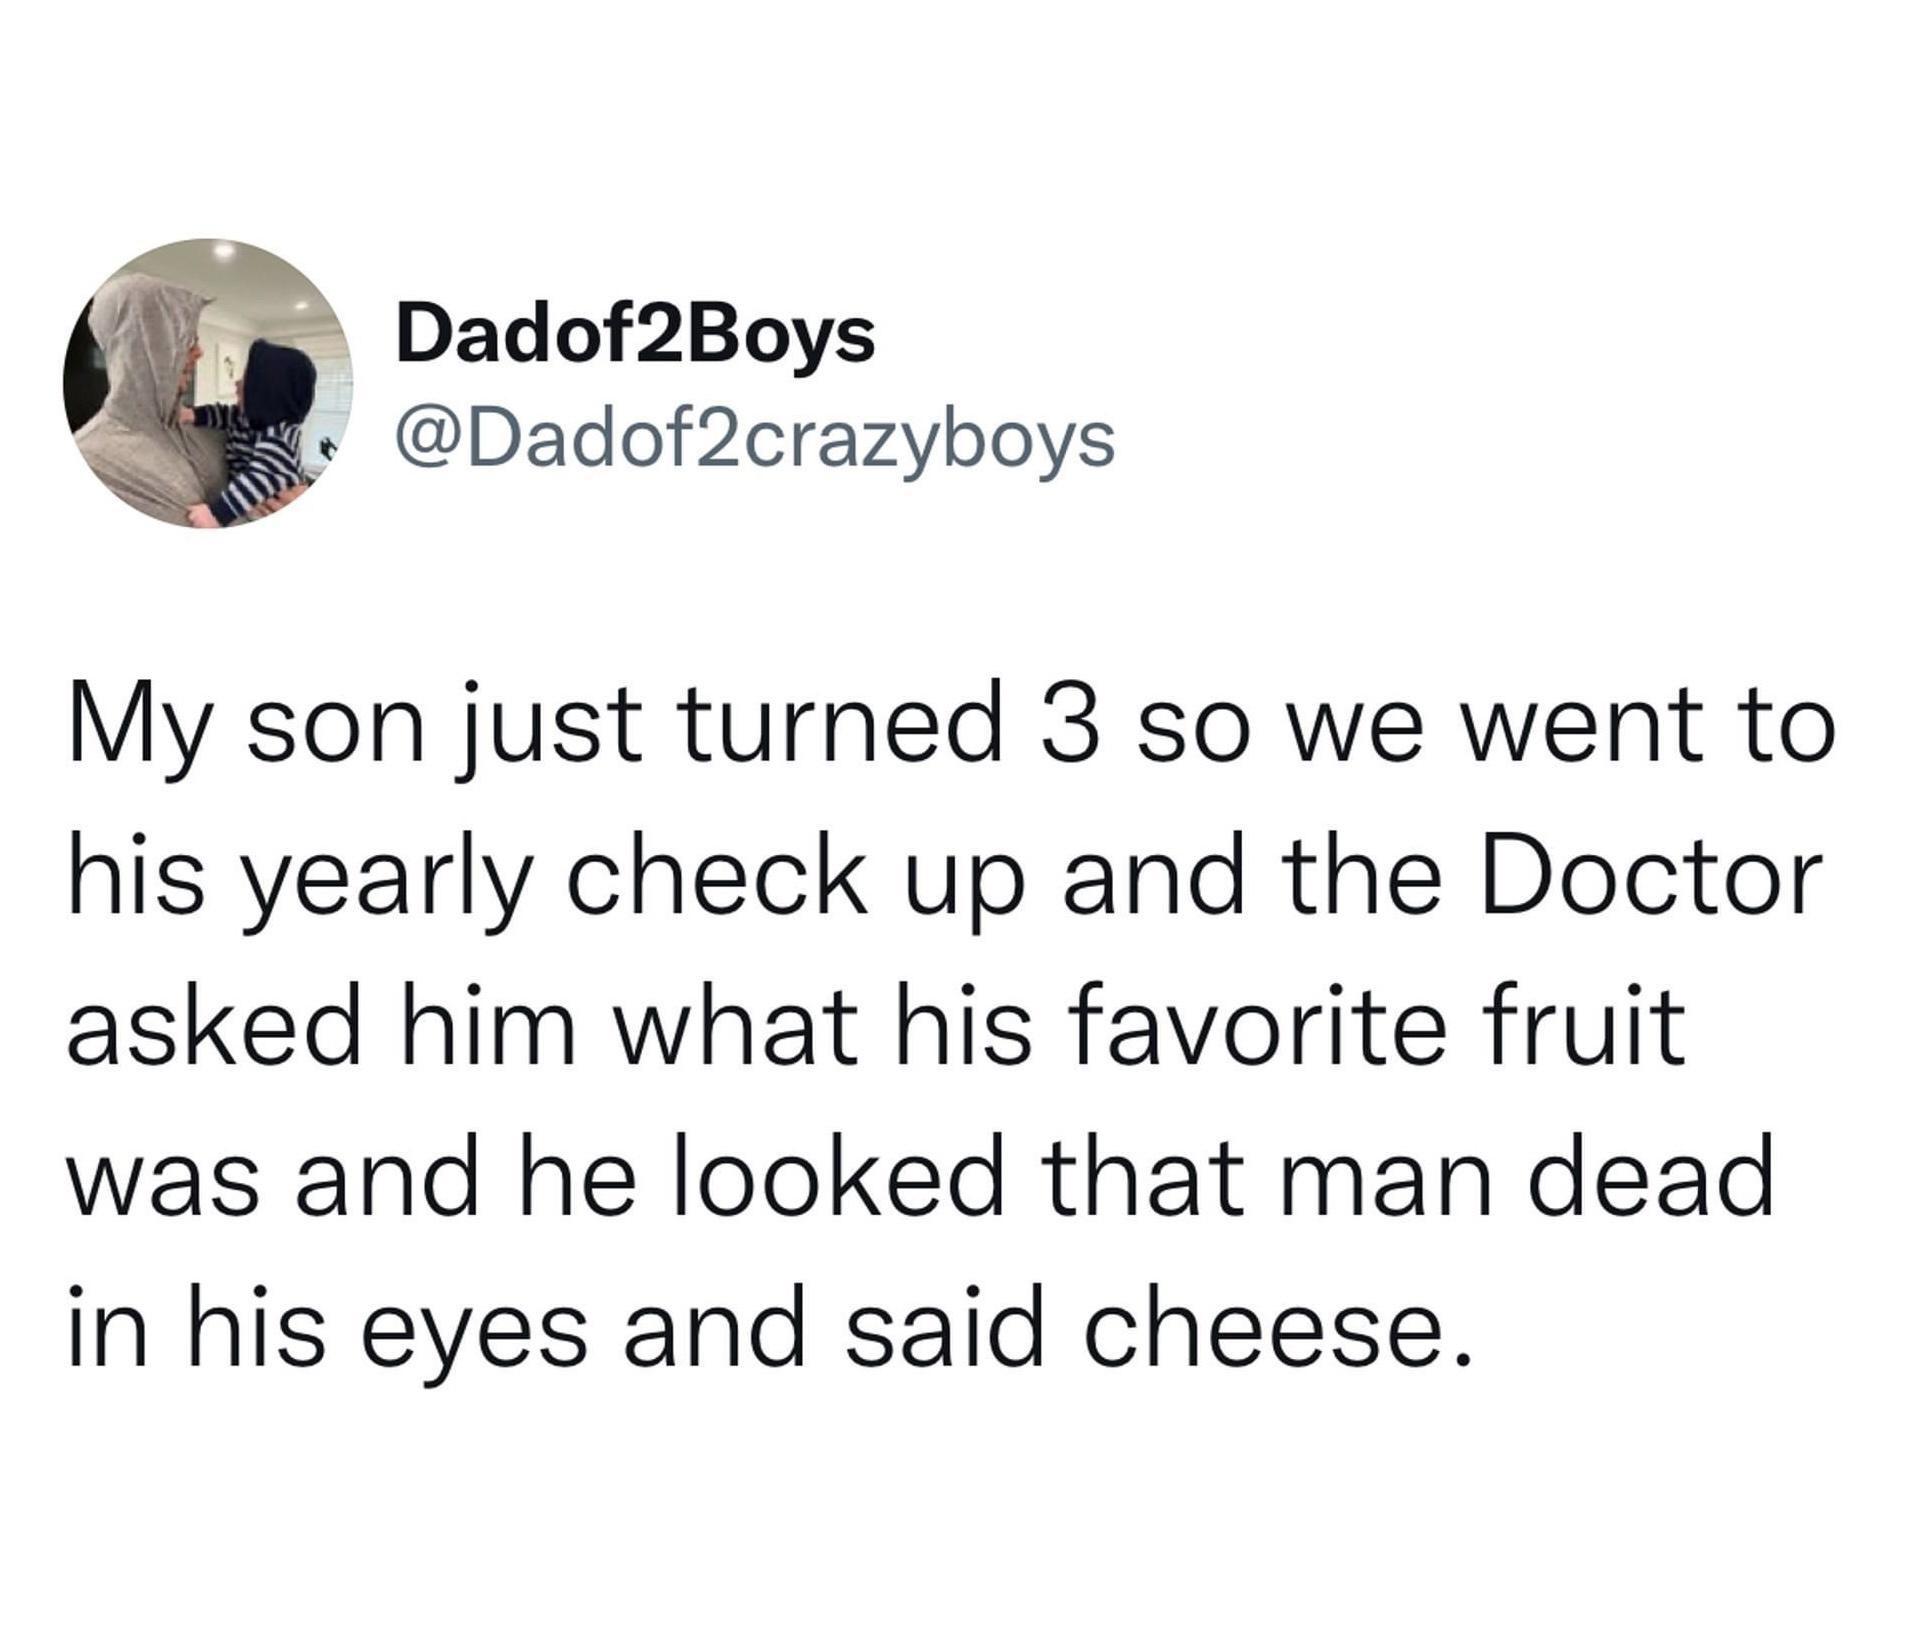 monday morning randomness - quotes - Dadof2Boys My son just turned 3 so we went to his yearly check up and the Doctor asked him what his favorite fruit was and he looked that man dead in his eyes and said cheese.